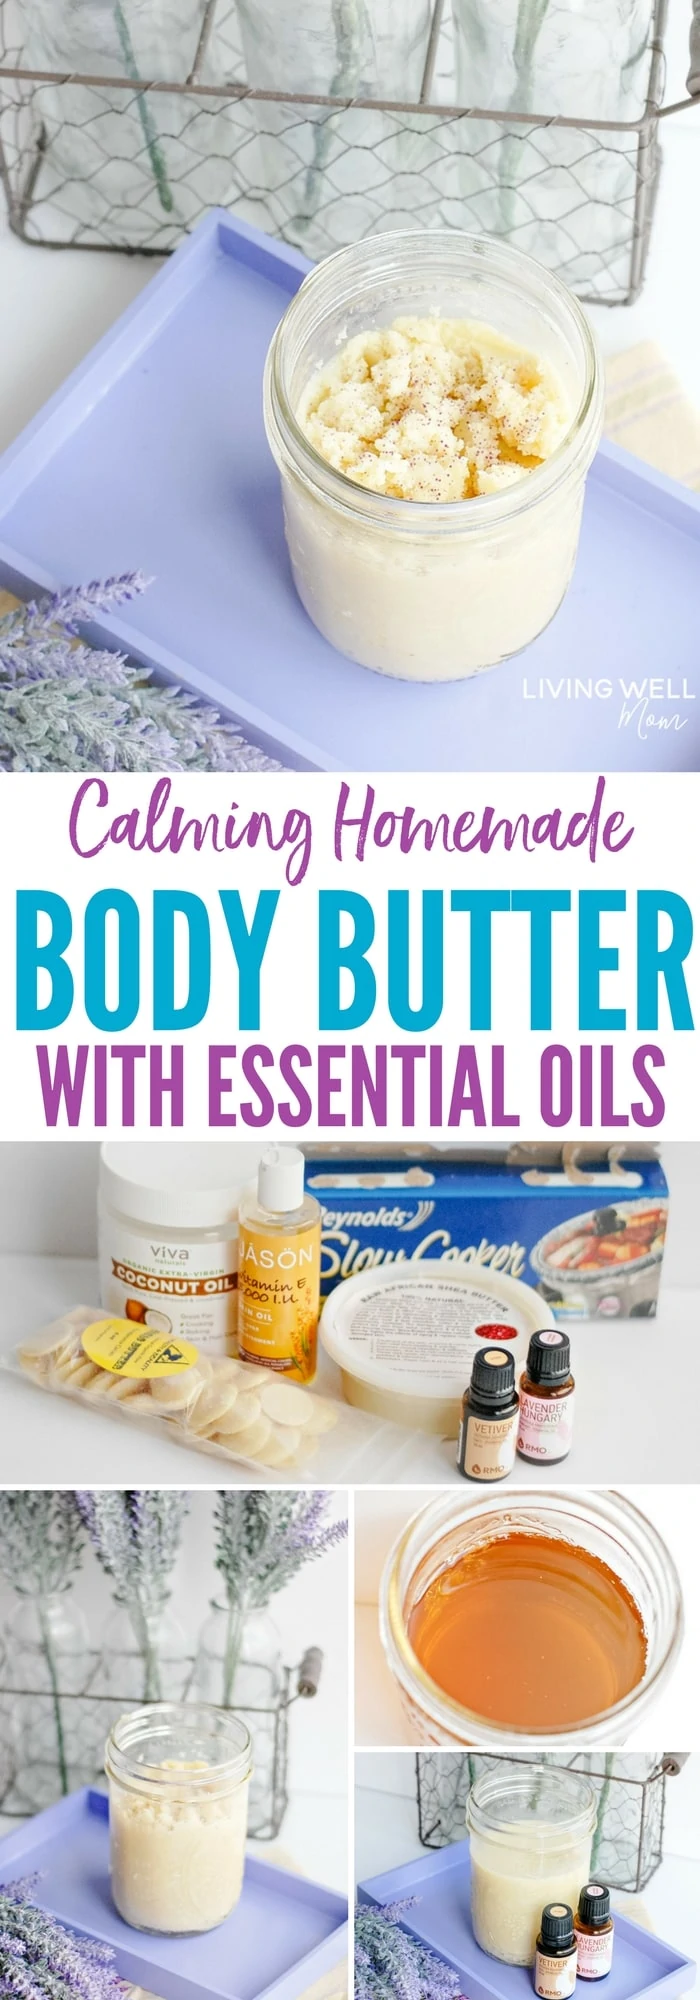 Calming Homemade Body Butter with Essential Oils Recipe